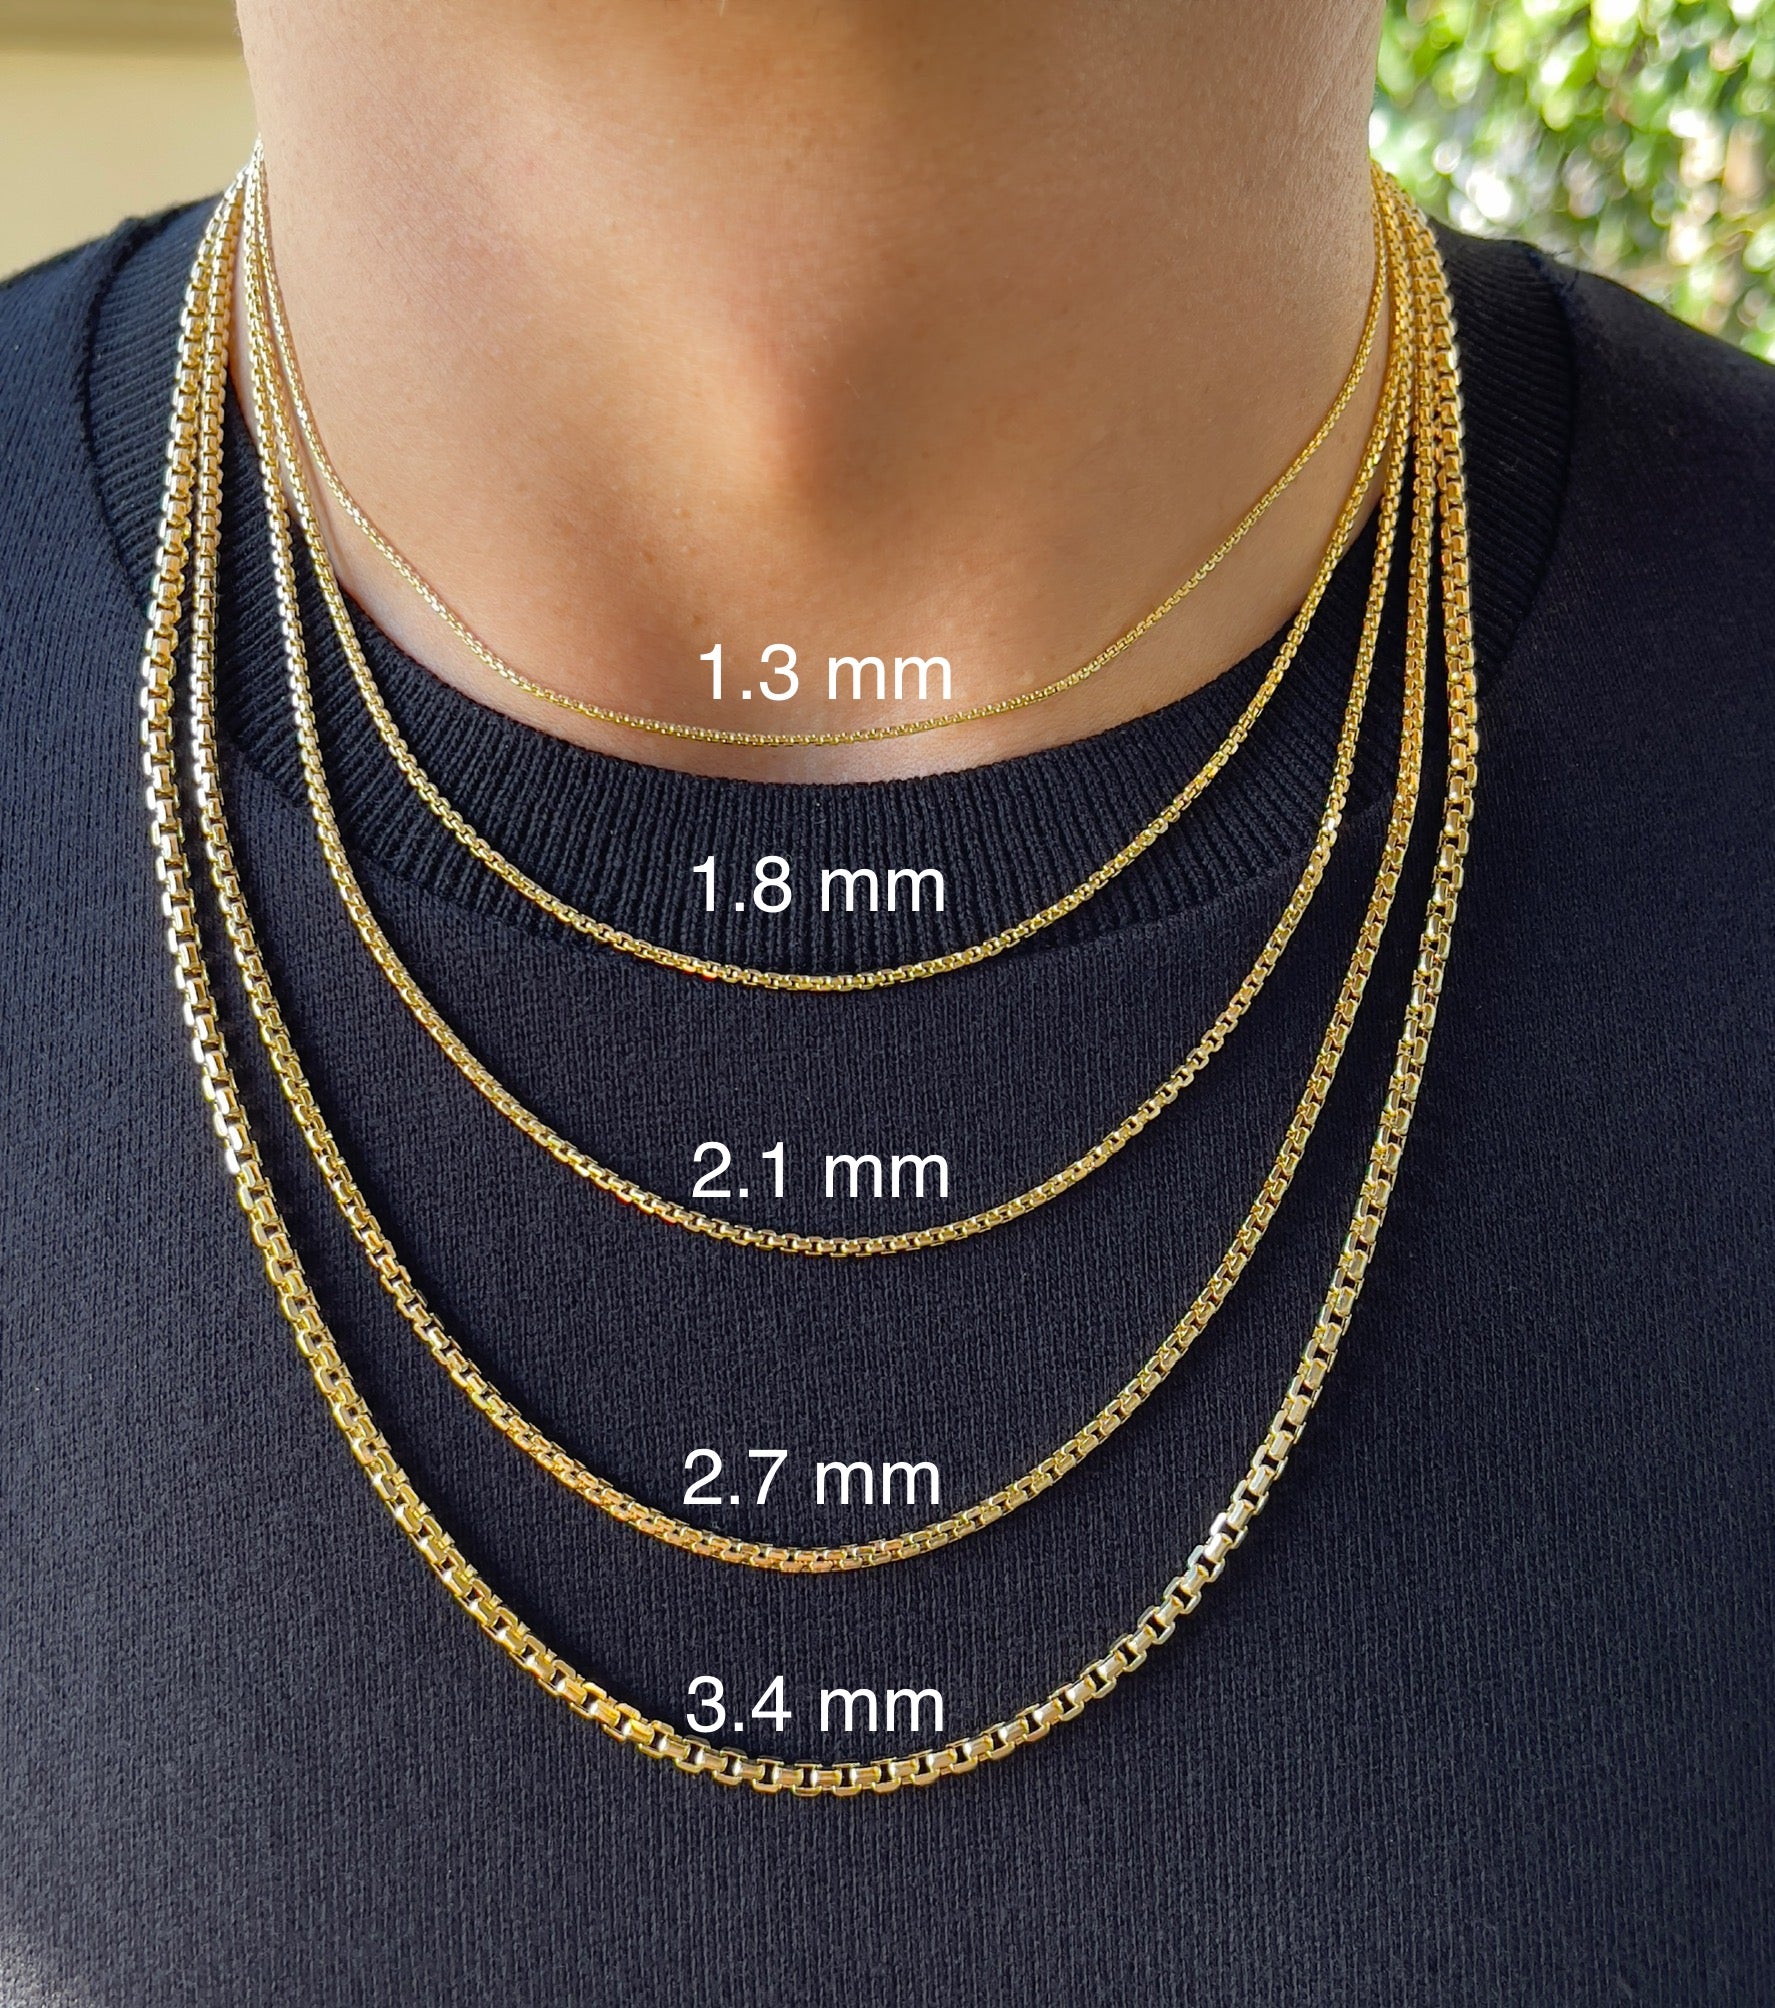 1mm Adjustable Threader Bead Chain Necklace - 14K Yellow Gold